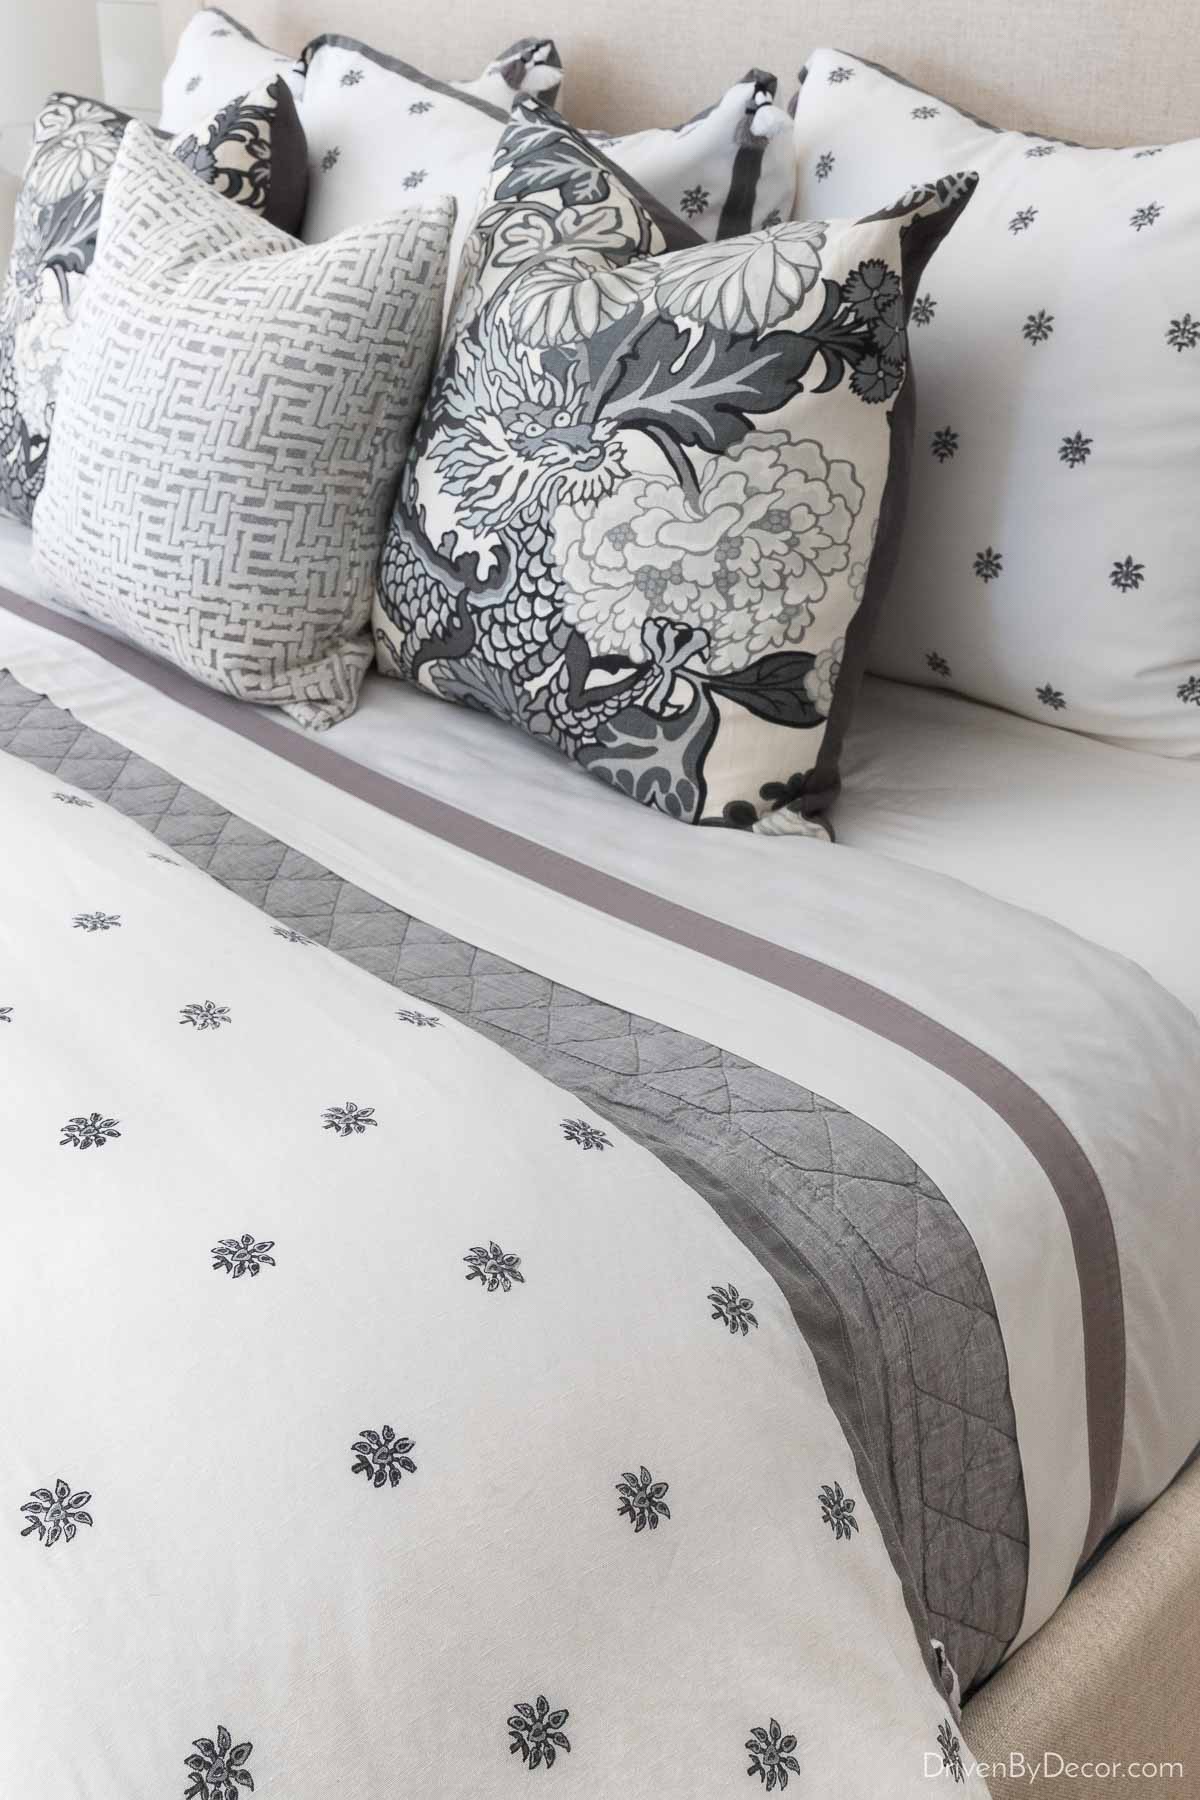 My favorite quilt for guest room bedding - gray color with white sheets and duvet